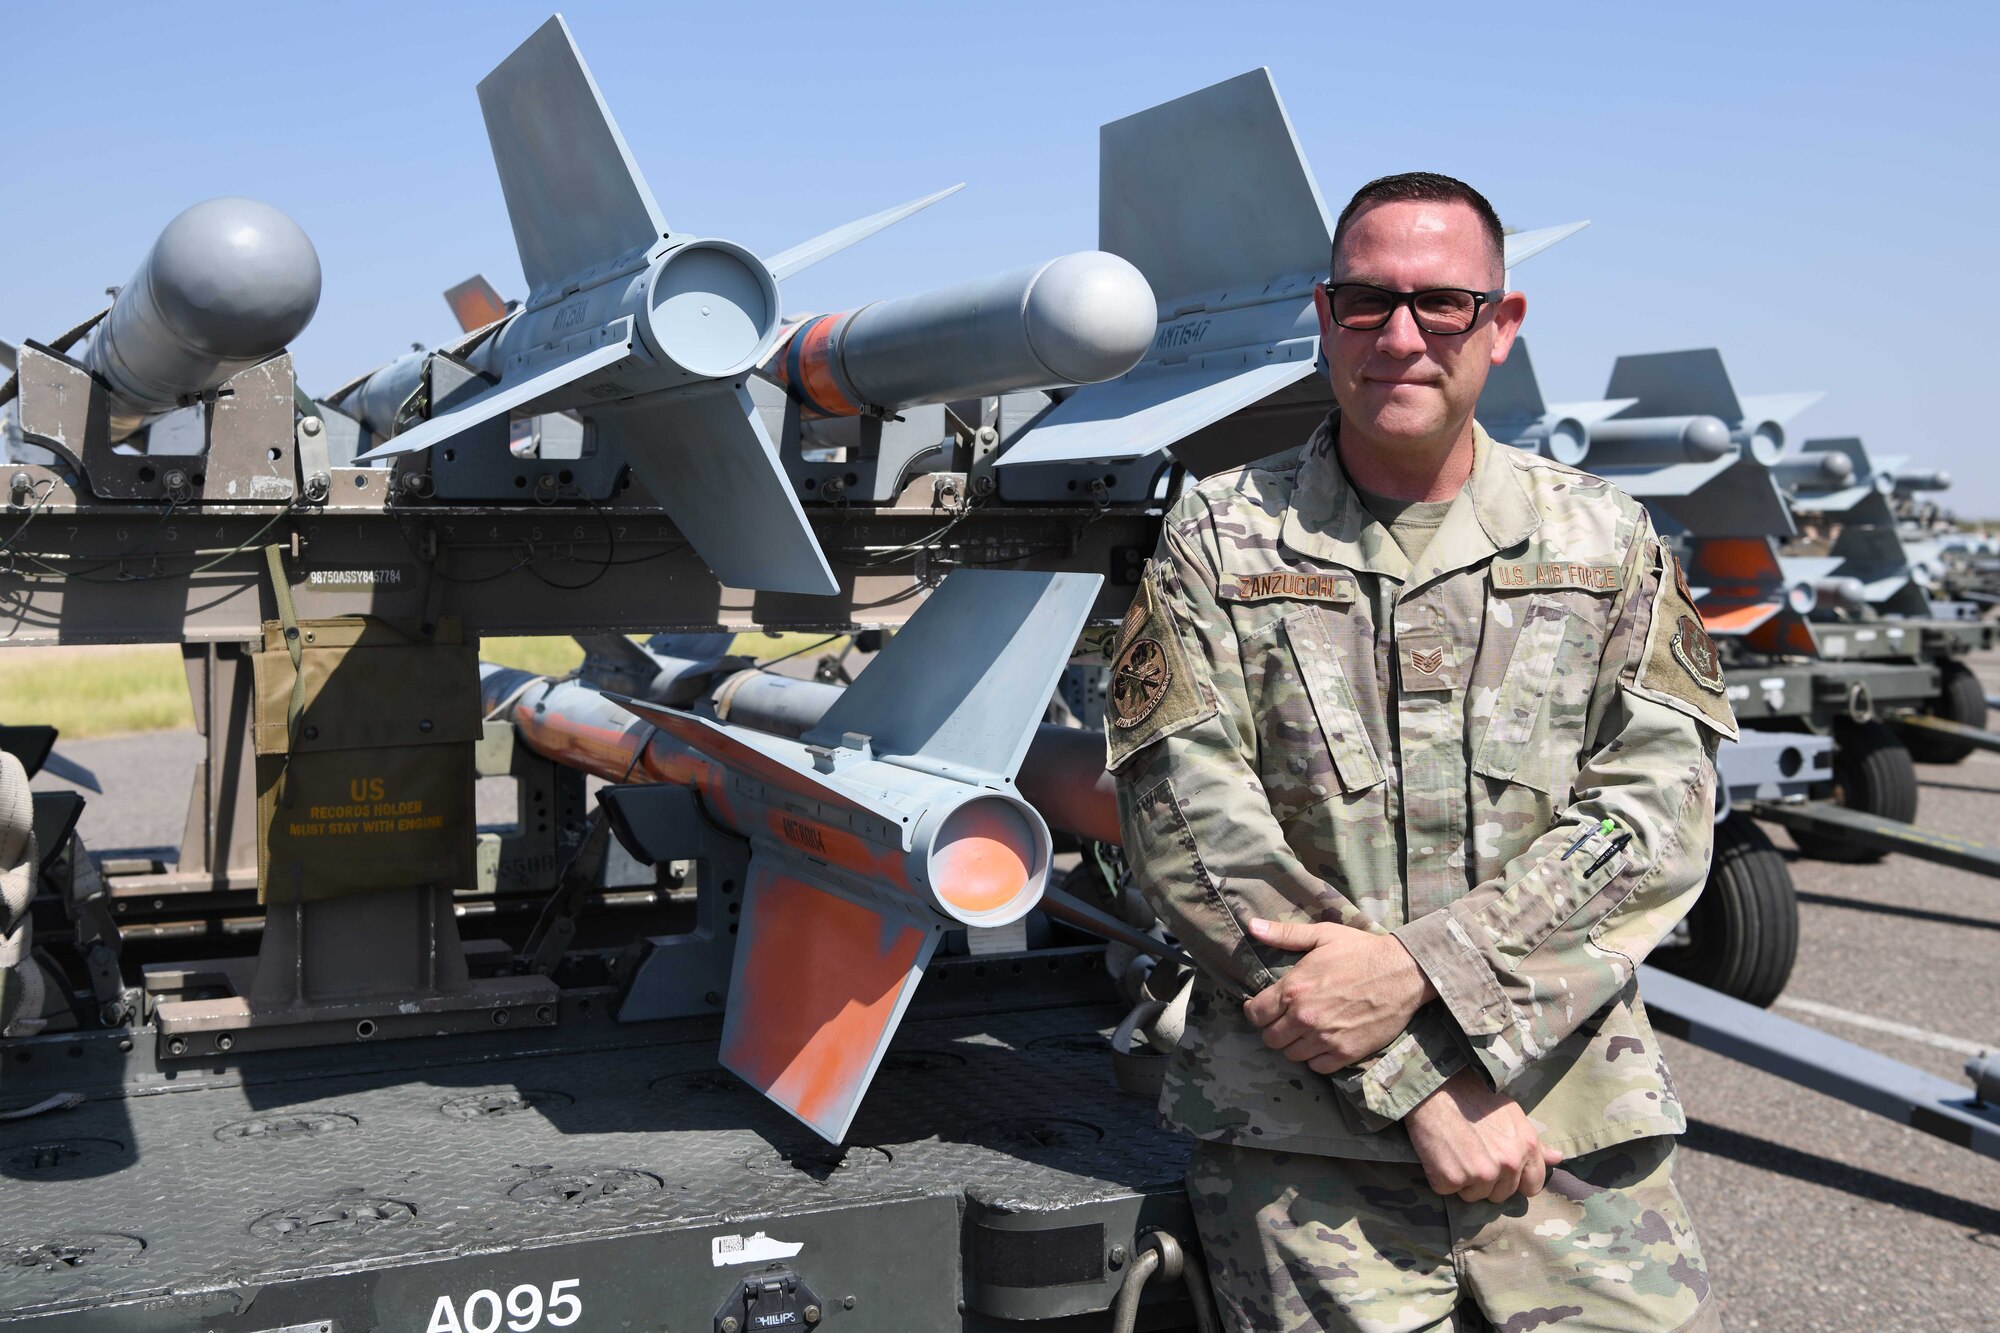 Luke Air Force Base, Ariz. -- Reserve Citizen Airman Staff Sgt. Stephen Zanzucchi, 944th Maintenance Squadron munitions support equipment maintenance crew chief, poses for a photo at Luke Air Force Base, Ariz., September 16, 2021. Zanzucchi was an elementary school teacher prior to joining the service and was inspired by his student’s to author six children’s book. (U.S. Air Force photo/Tech. Sgt. Courtney Richardson)